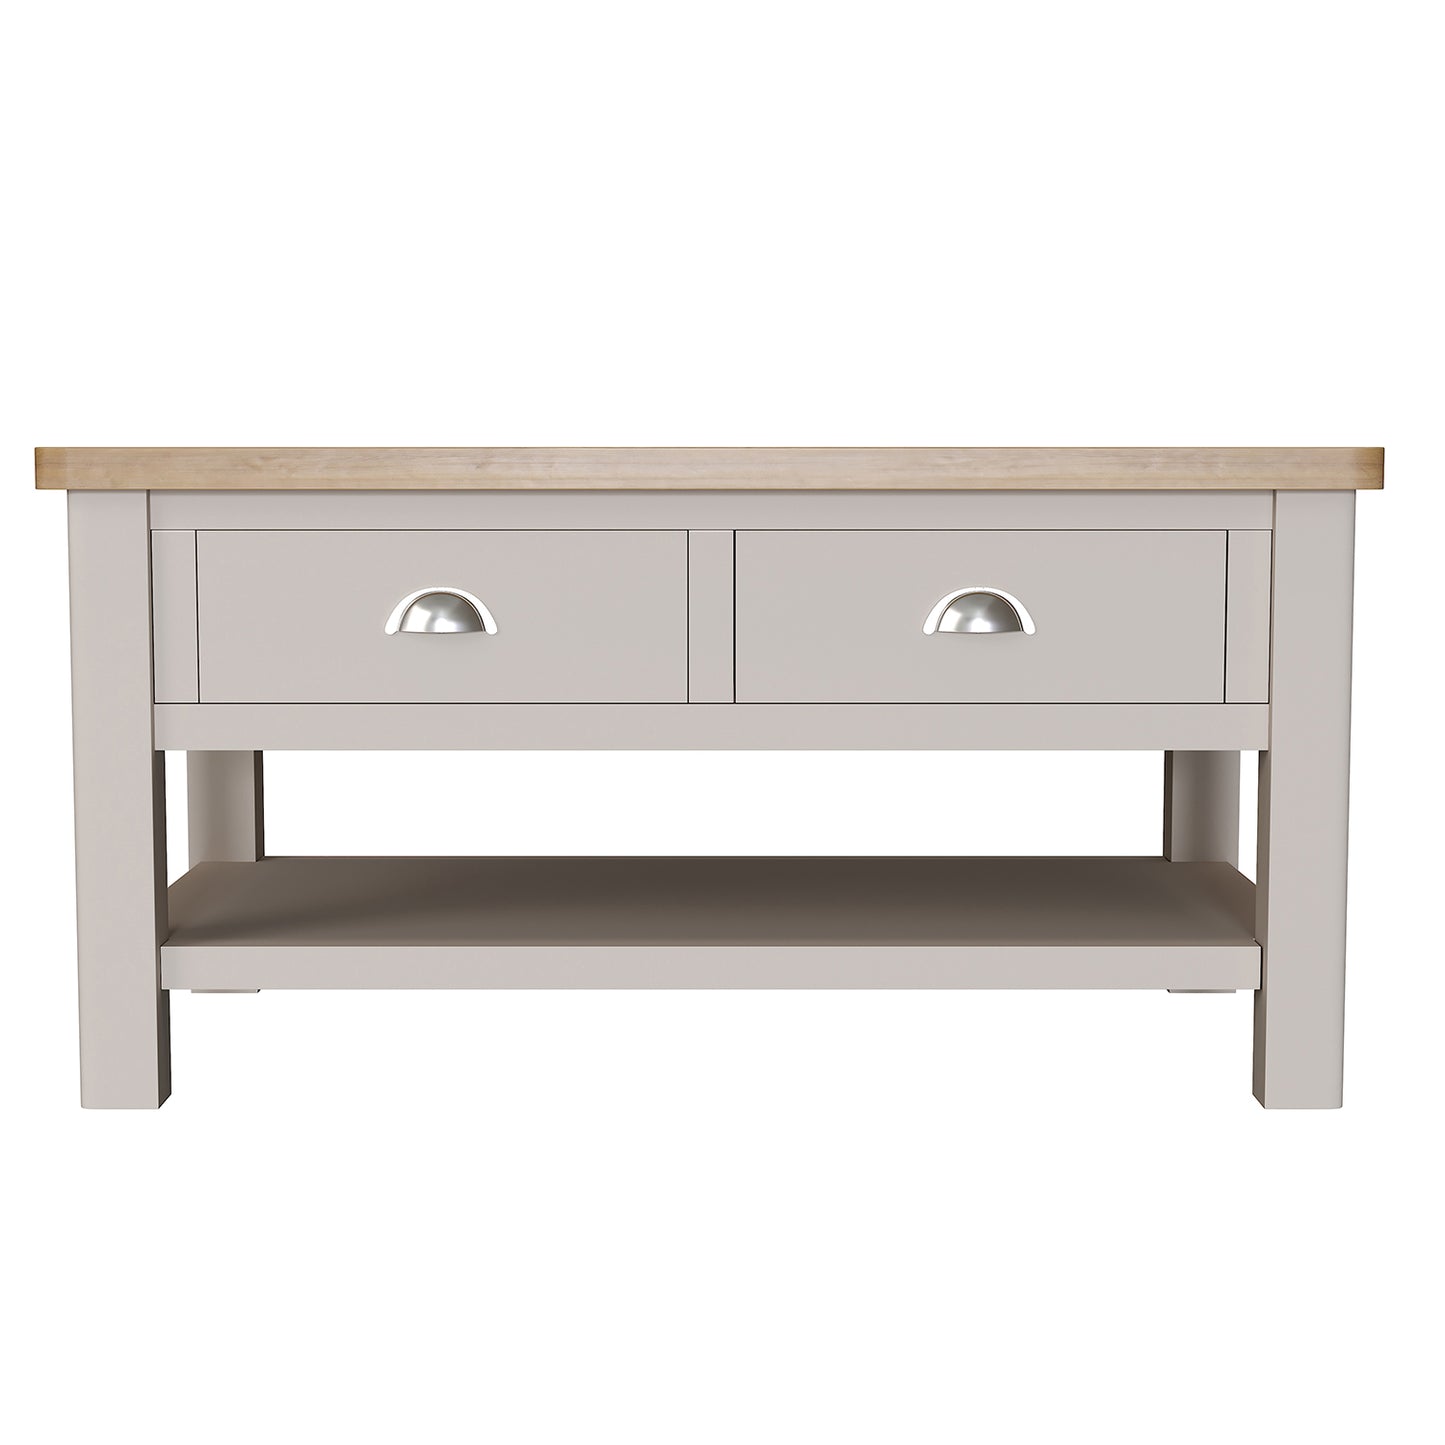 Pershore Painted Coffee Table - Large